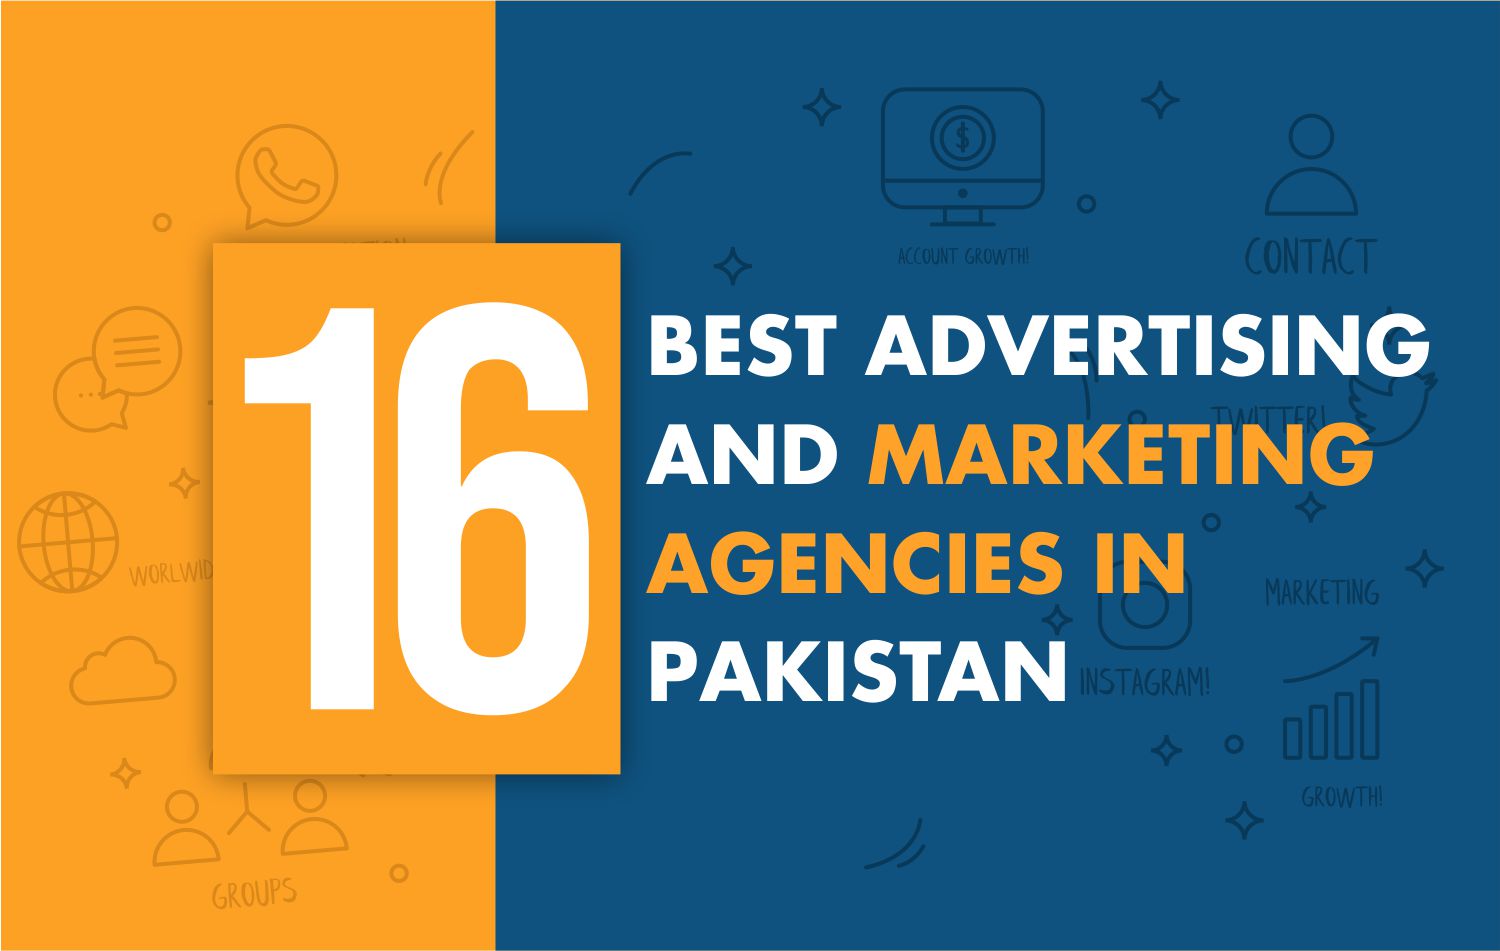 All About Designing and Branding Agency in Pakistan